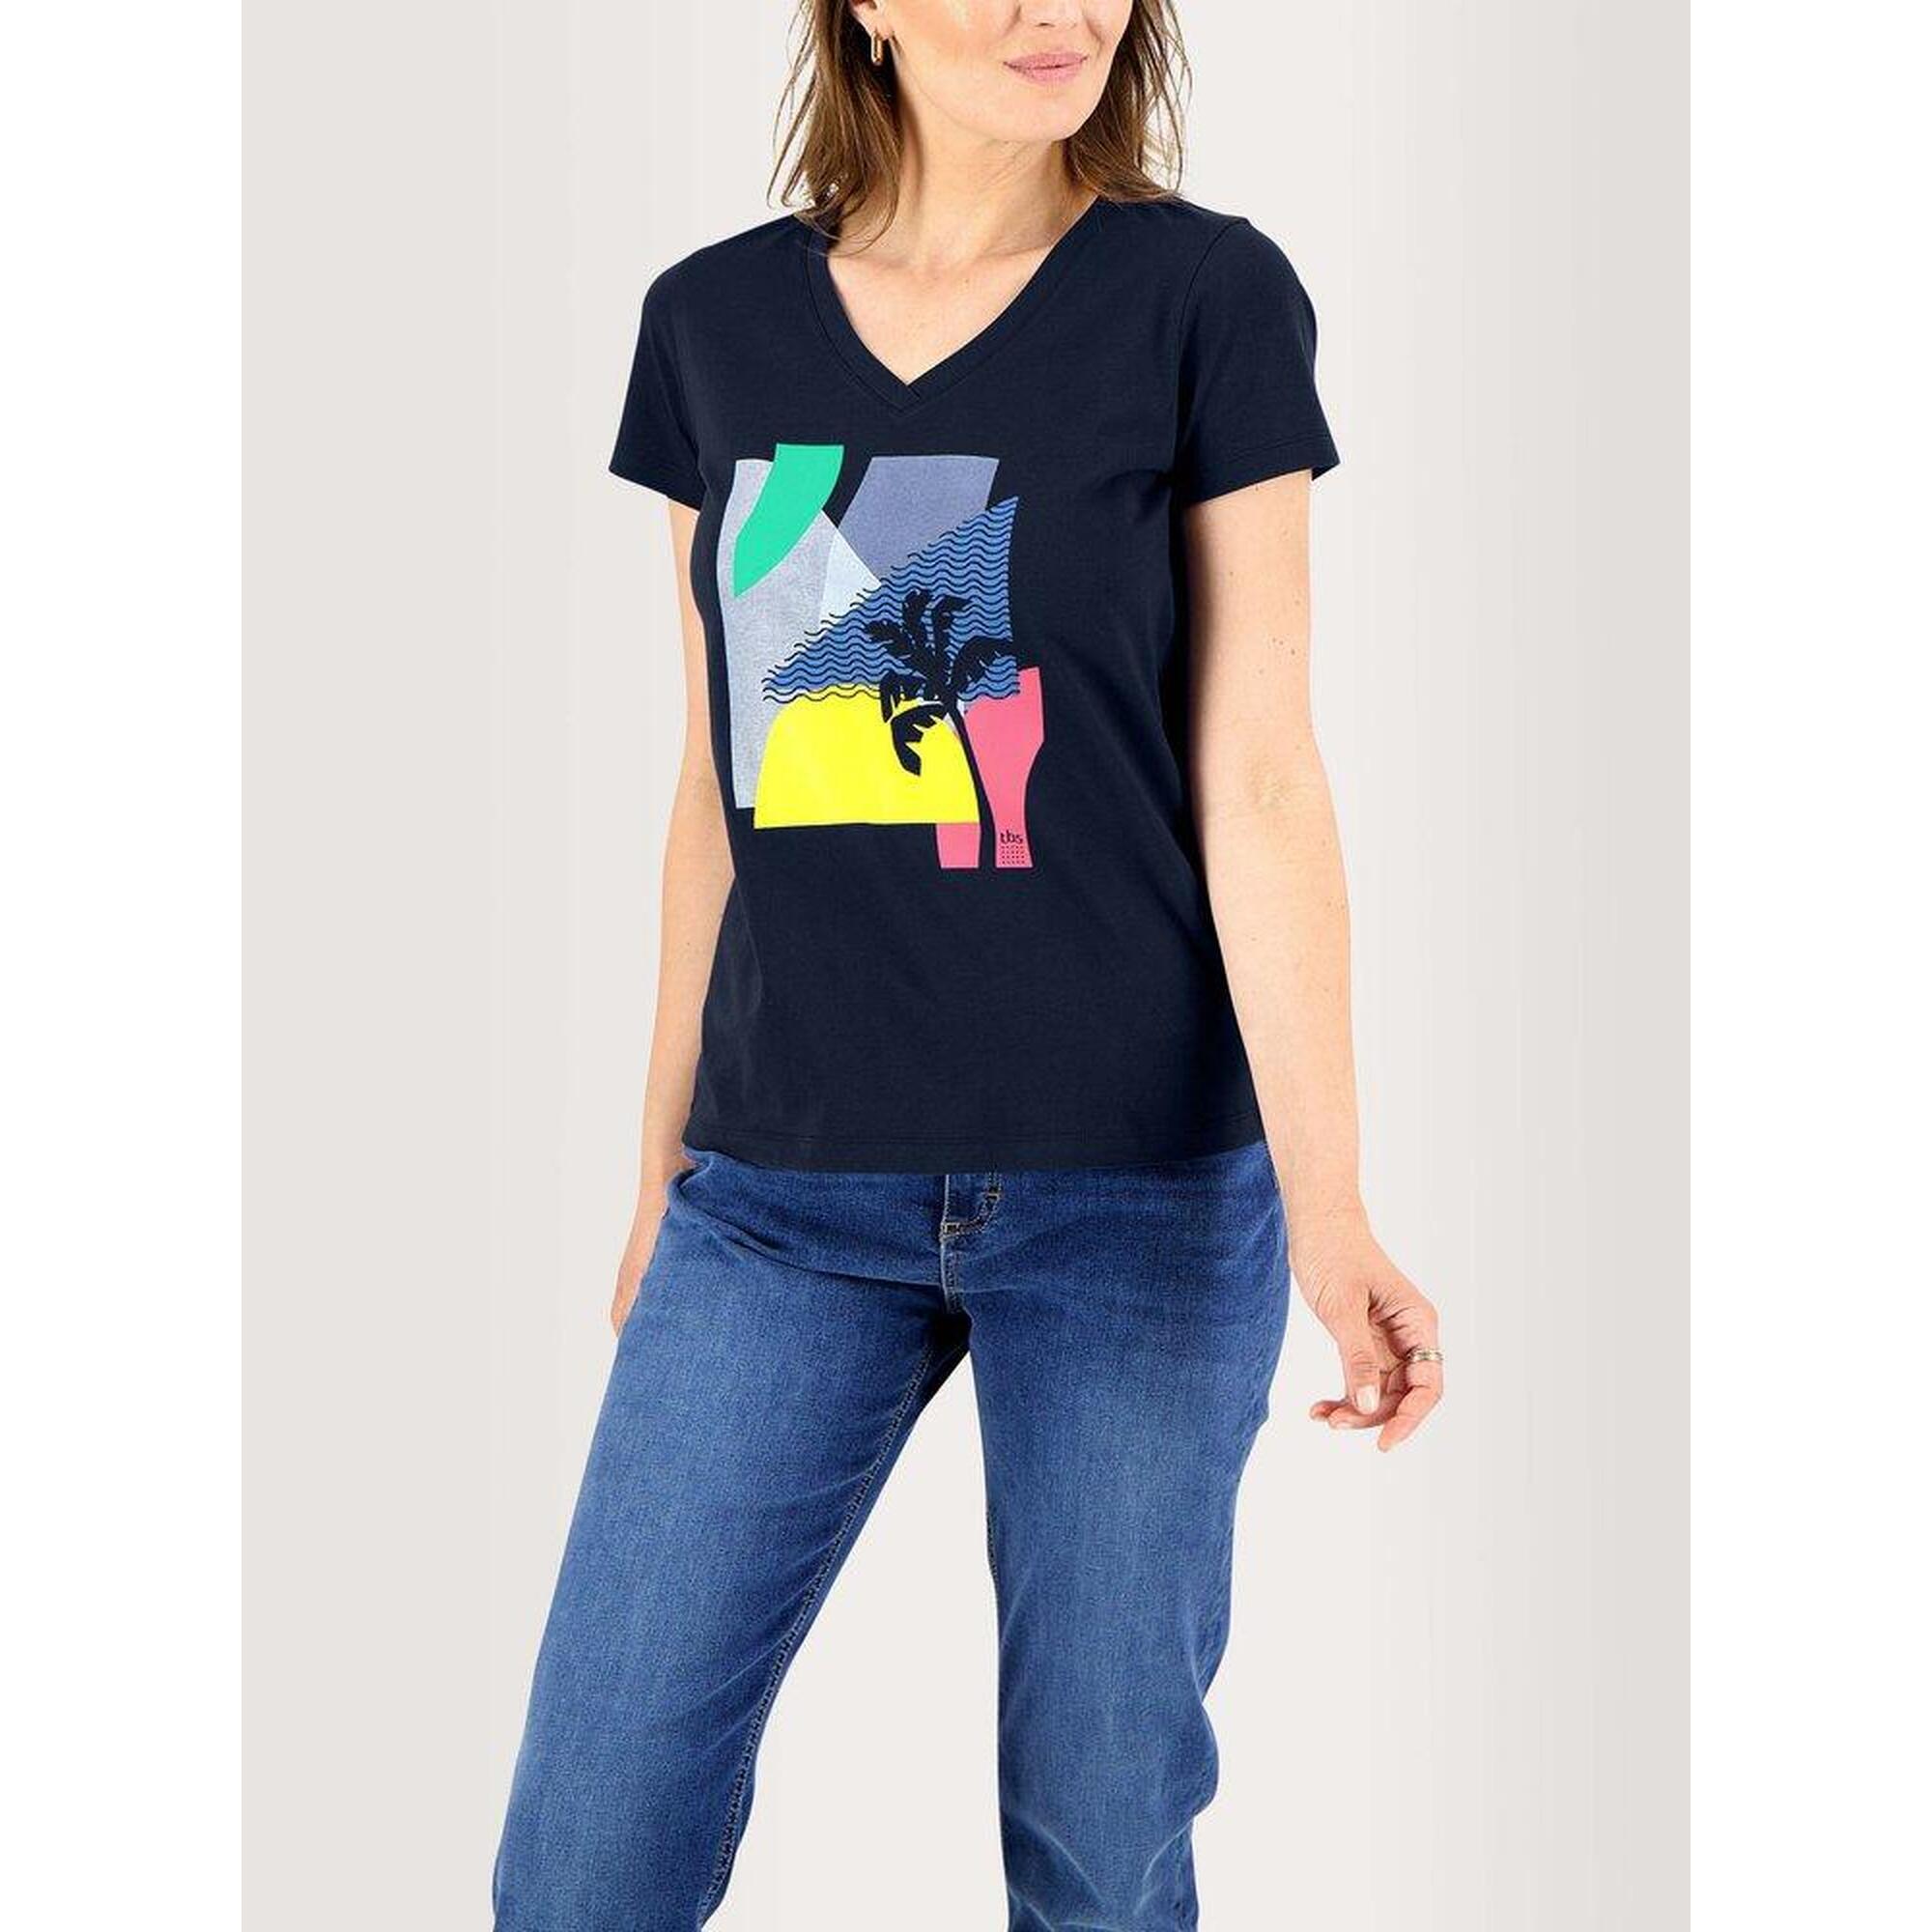 T-shirt manches courtes Femme - FAUSTTEE Navy